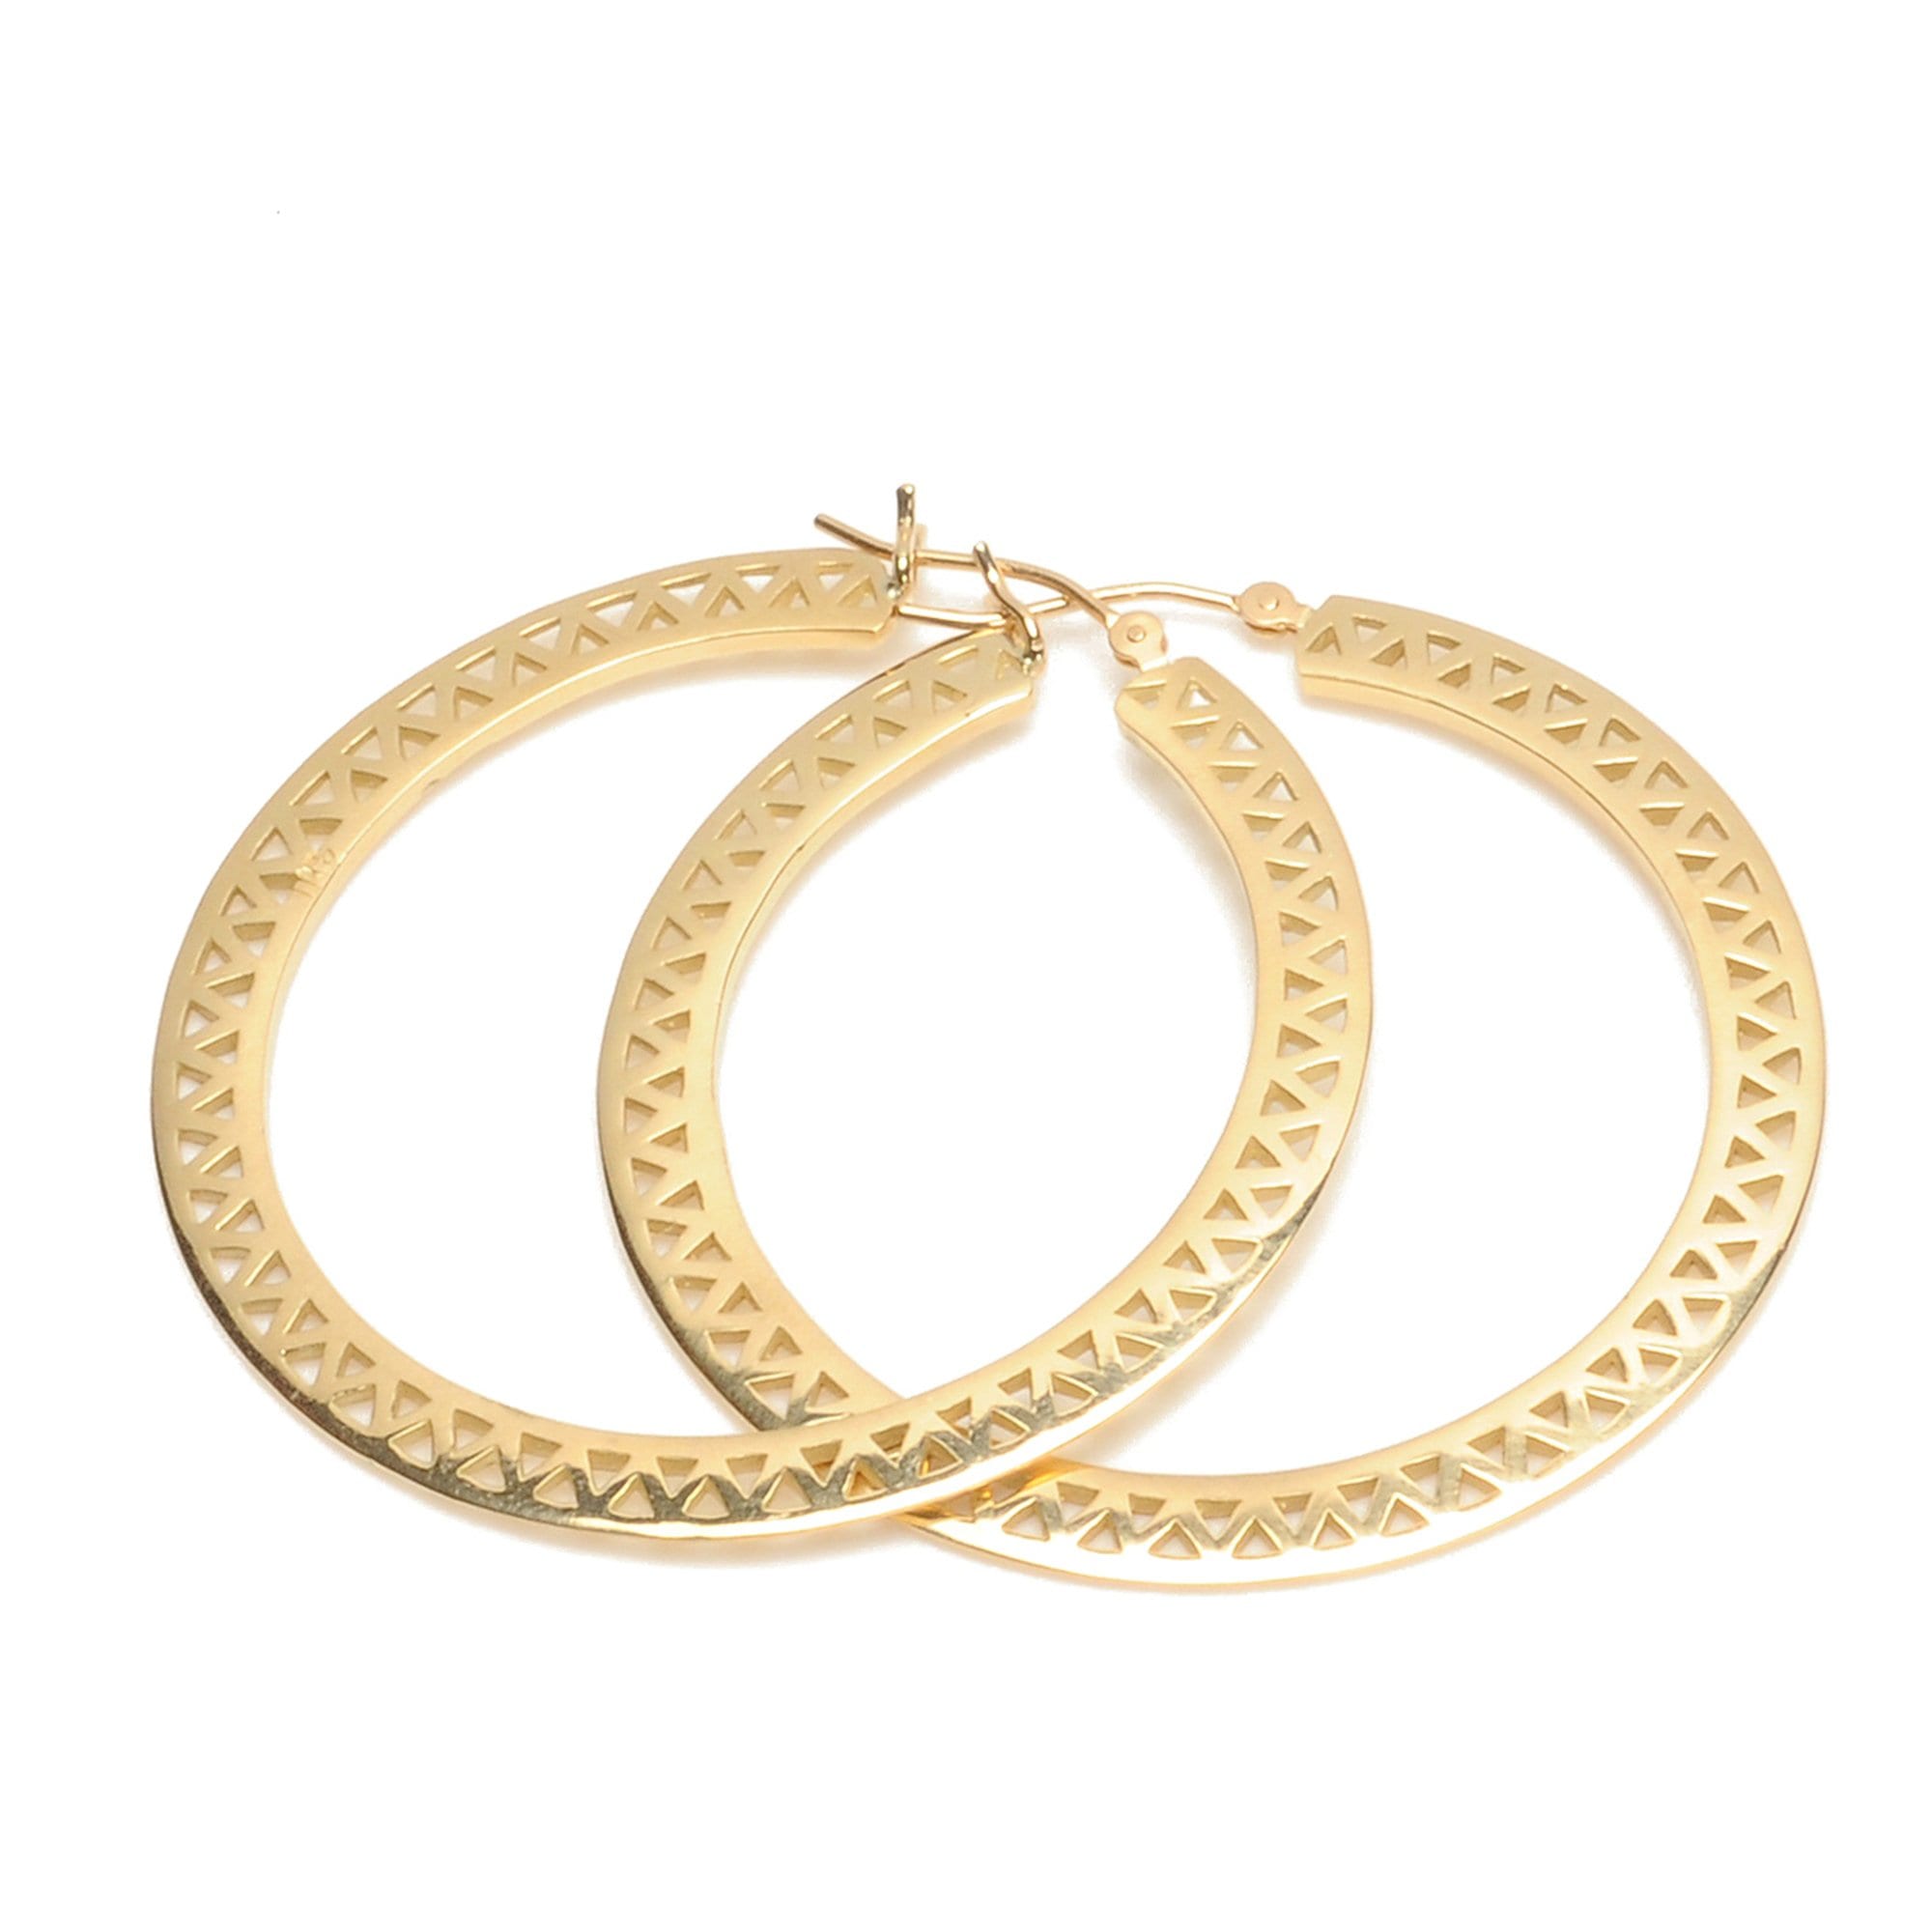 Vincents Fine Jewelry | Ray Griffiths | Medium Crownwork Hoops 